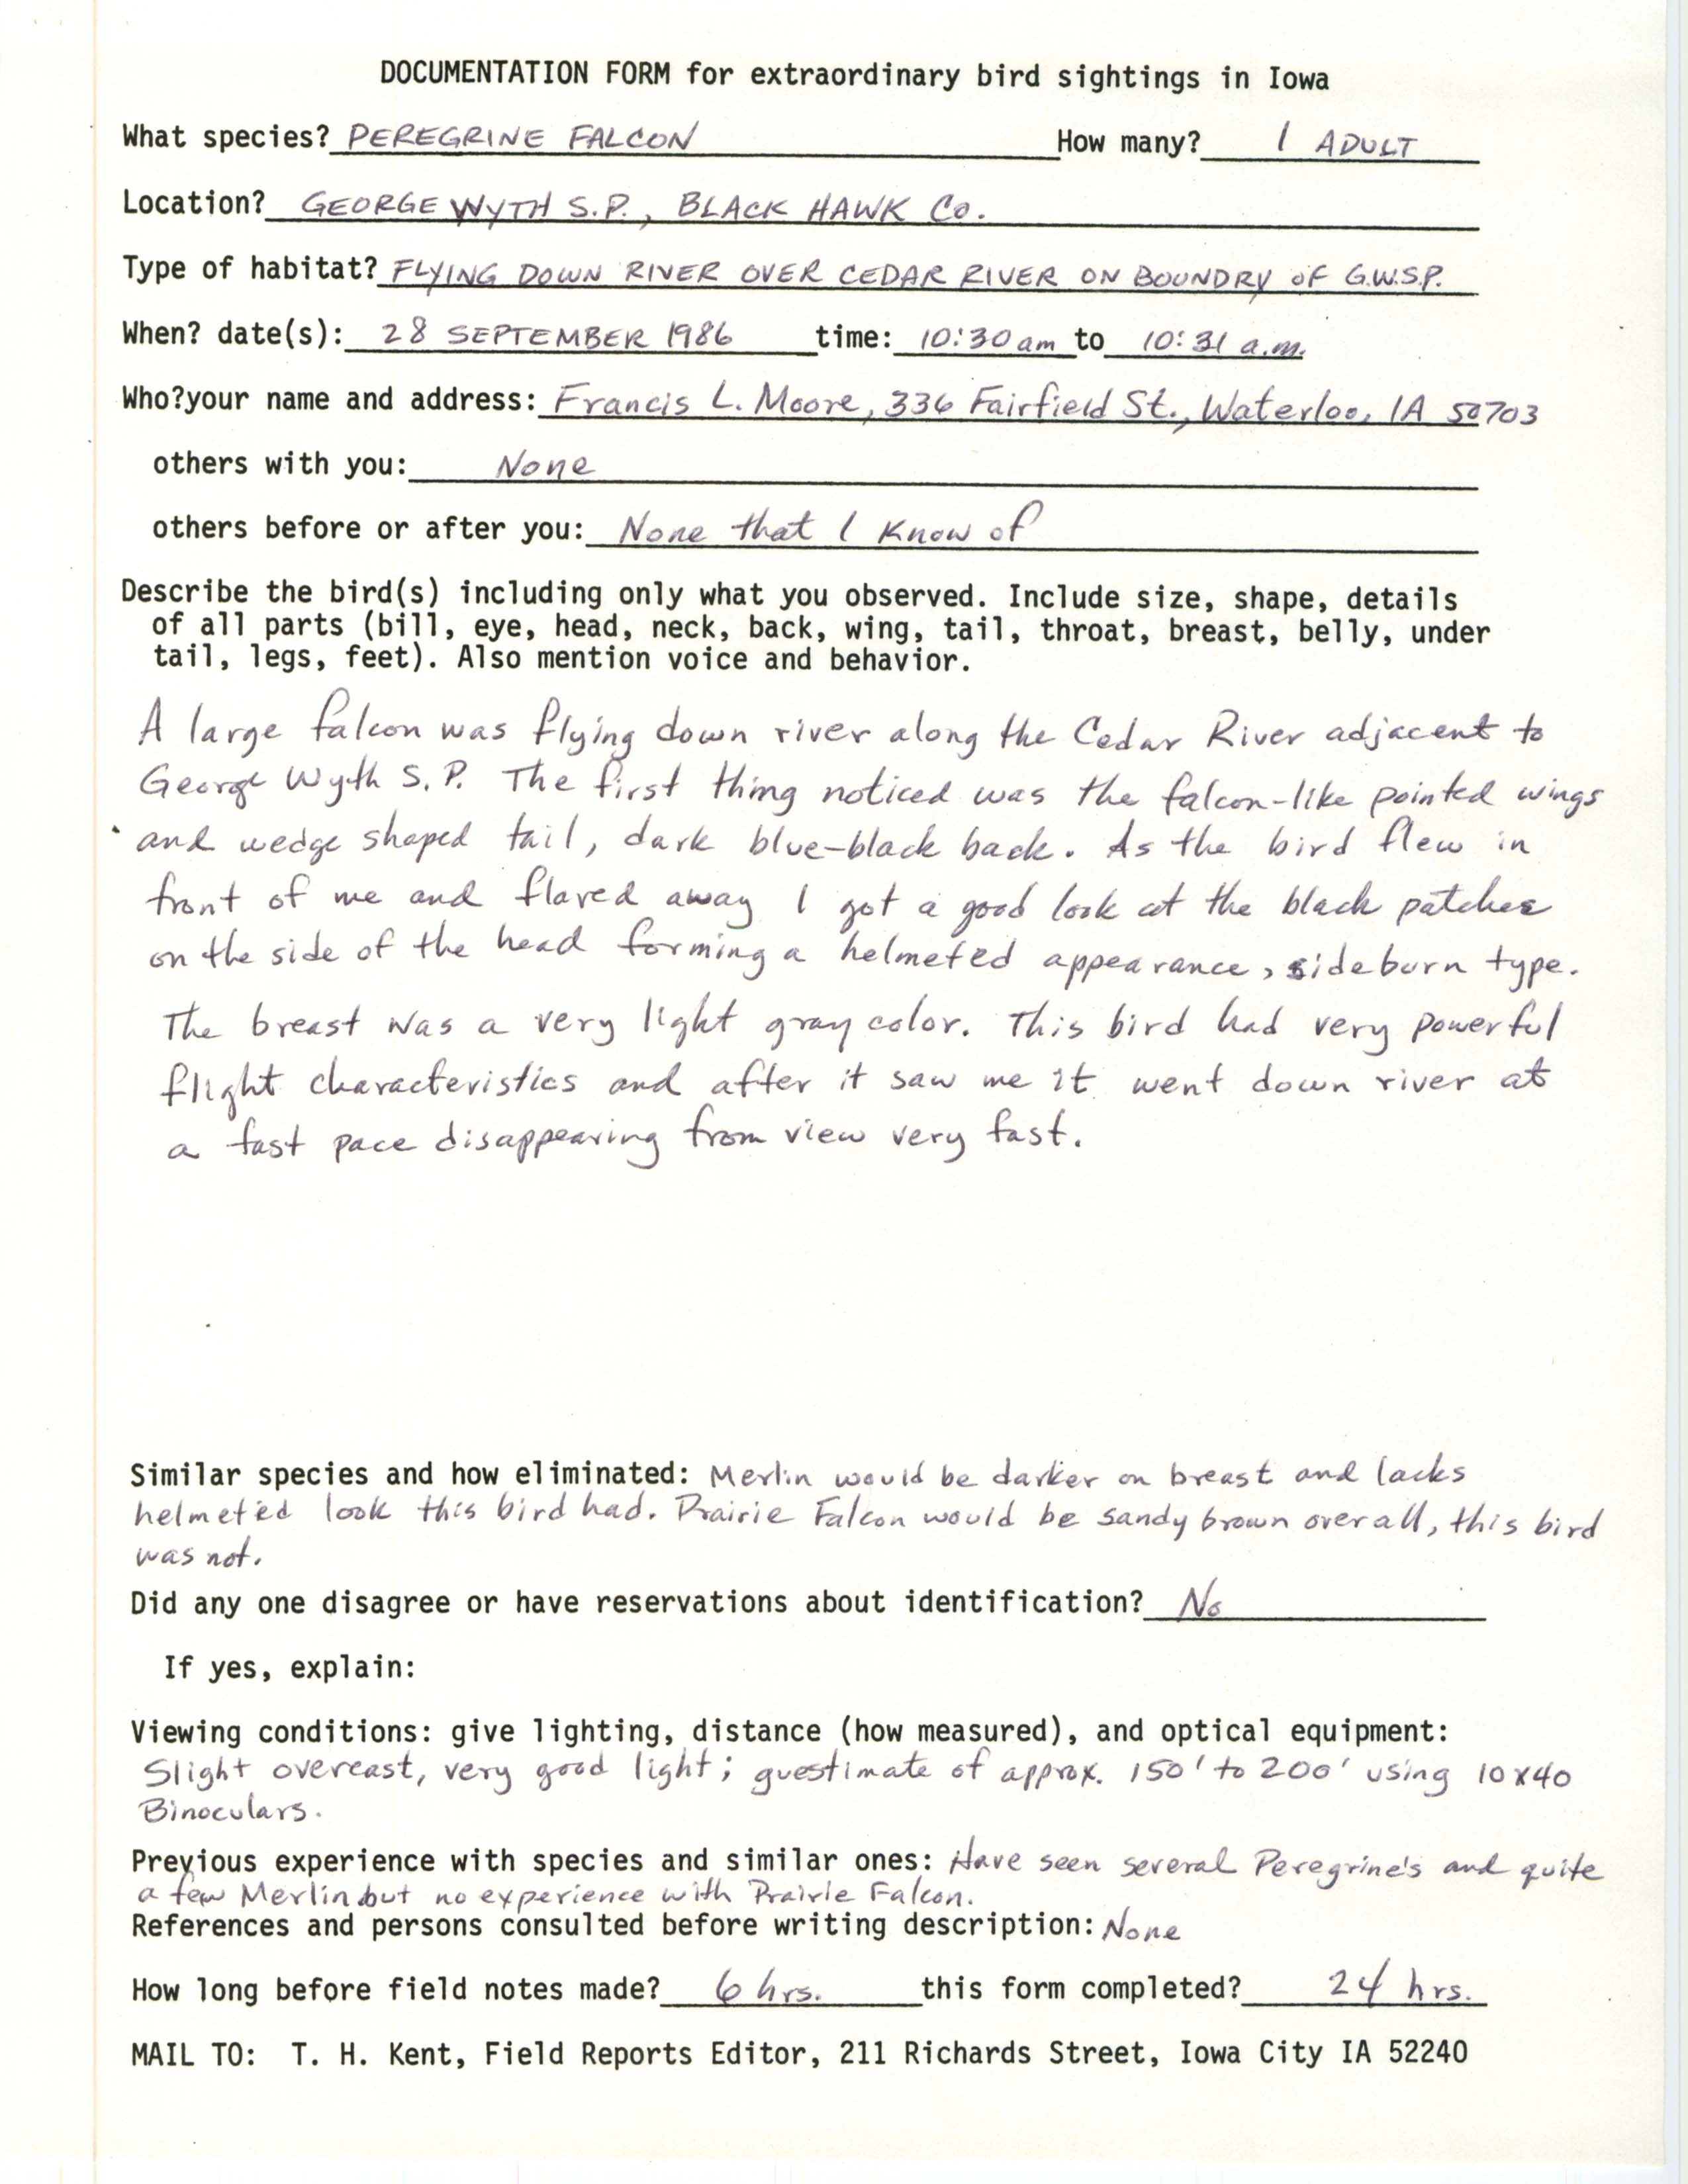 Rare bird documentation form for Peregrine Falcon at George Wyth State Park, 1986